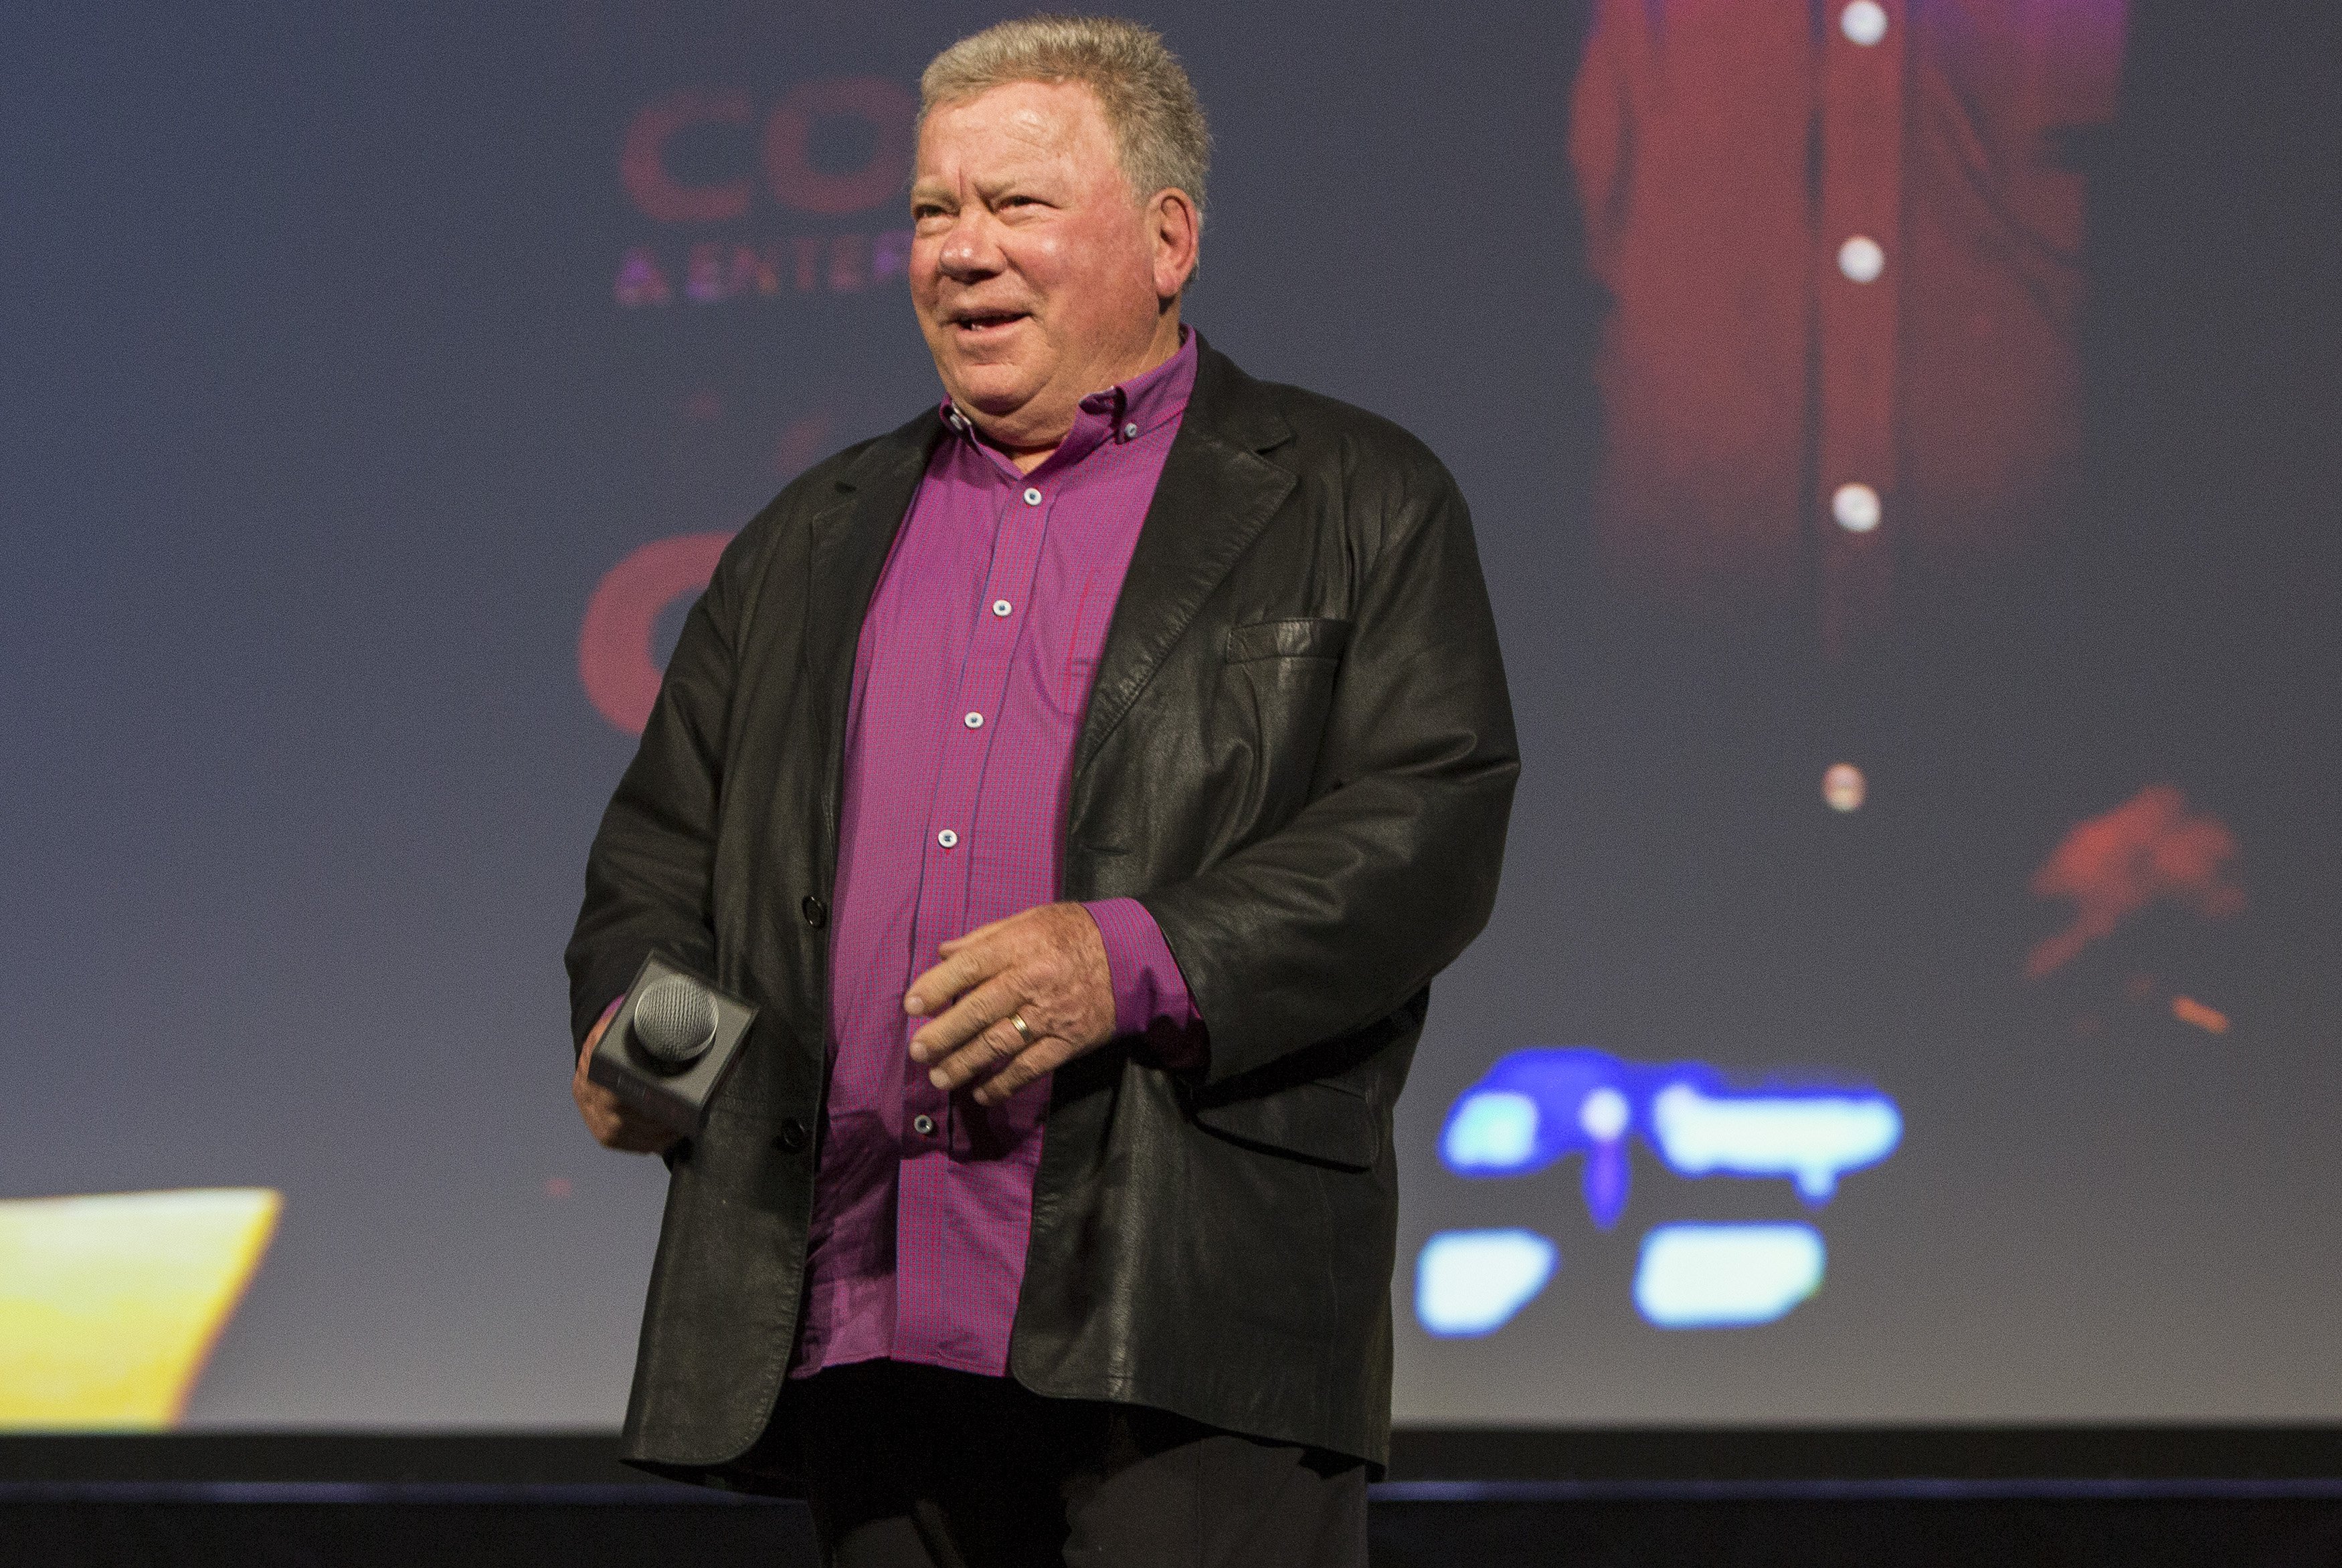 Actor William Shatner during C2E2 at McCormick Place on March 01, 2020 in Chicago, Illinois. | Source: Getty Images